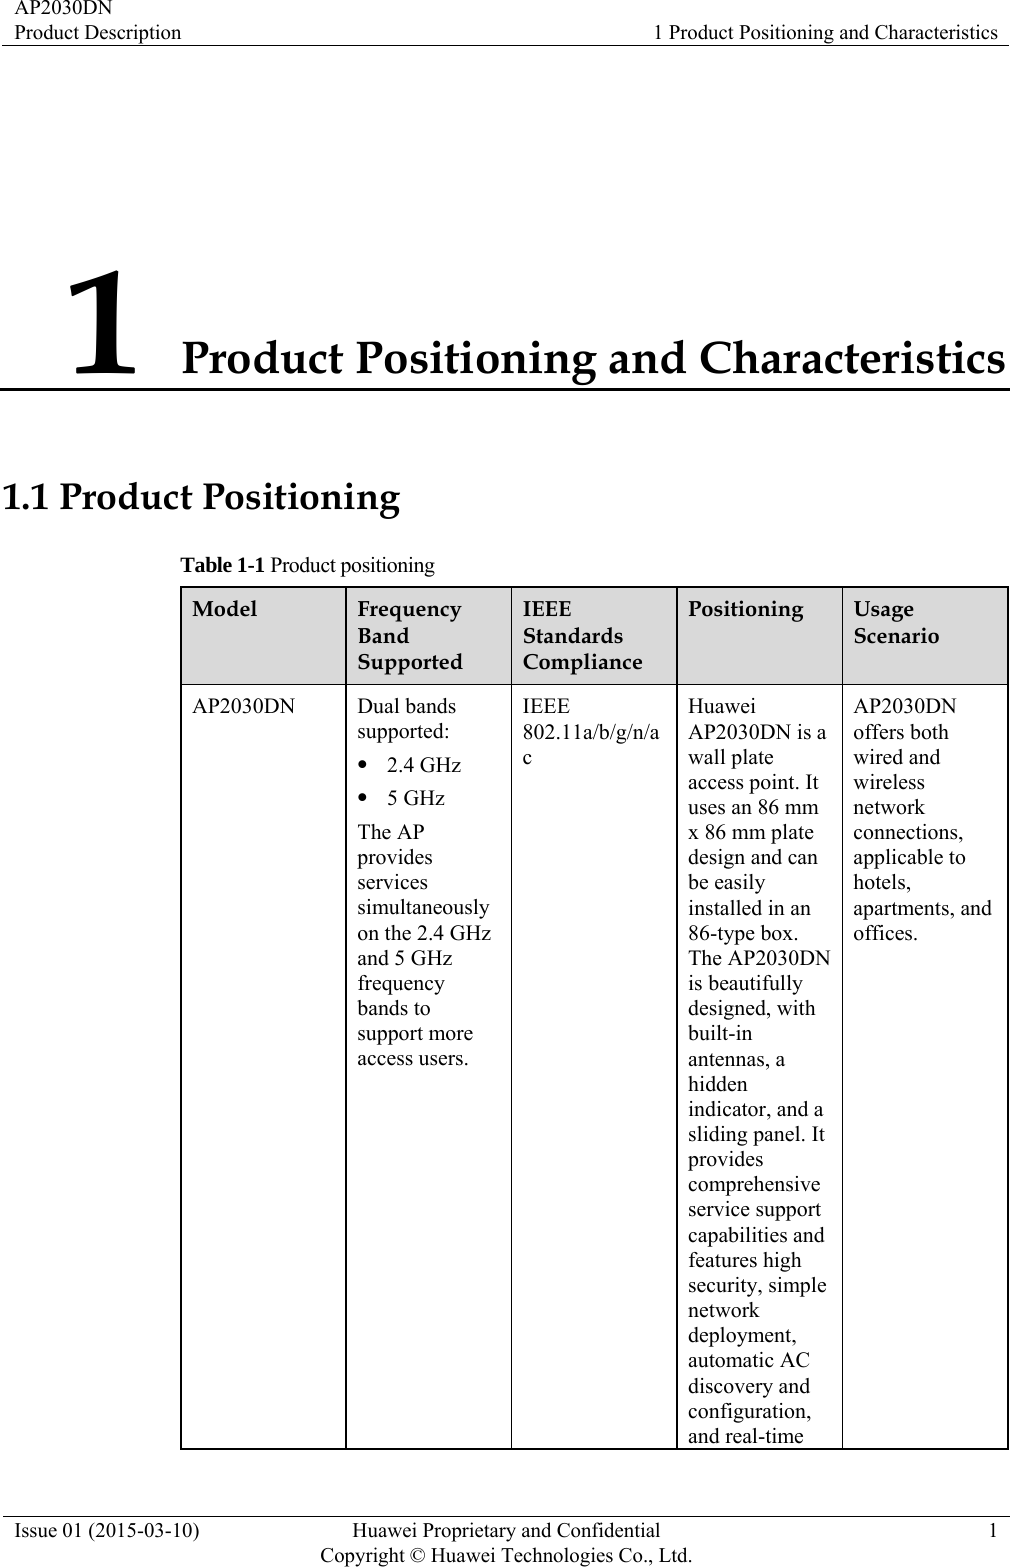 AP2030DN Product Description  1 Product Positioning and Characteristics Issue 01 (2015-03-10)  Huawei Proprietary and Confidential         Copyright © Huawei Technologies Co., Ltd.1 1 Product Positioning and Characteristics 1.1 Product Positioning Table 1-1 Product positioning Model  Frequency Band Supported IEEE Standards Compliance Positioning  Usage Scenario AP2030DN Dual bands supported: z 2.4 GHz z 5 GHz The AP provides services simultaneously on the 2.4 GHz and 5 GHz frequency bands to support more access users. IEEE 802.11a/b/g/n/ac Huawei AP2030DN is a wall plate access point. It uses an 86 mm x 86 mm plate design and can be easily installed in an 86-type box. The AP2030DN is beautifully designed, with built-in antennas, a hidden indicator, and a sliding panel. It provides comprehensive service support capabilities and features high security, simple network deployment, automatic AC discovery and configuration, and real-time AP2030DN offers both wired and wireless network connections, applicable to hotels, apartments, and offices. 